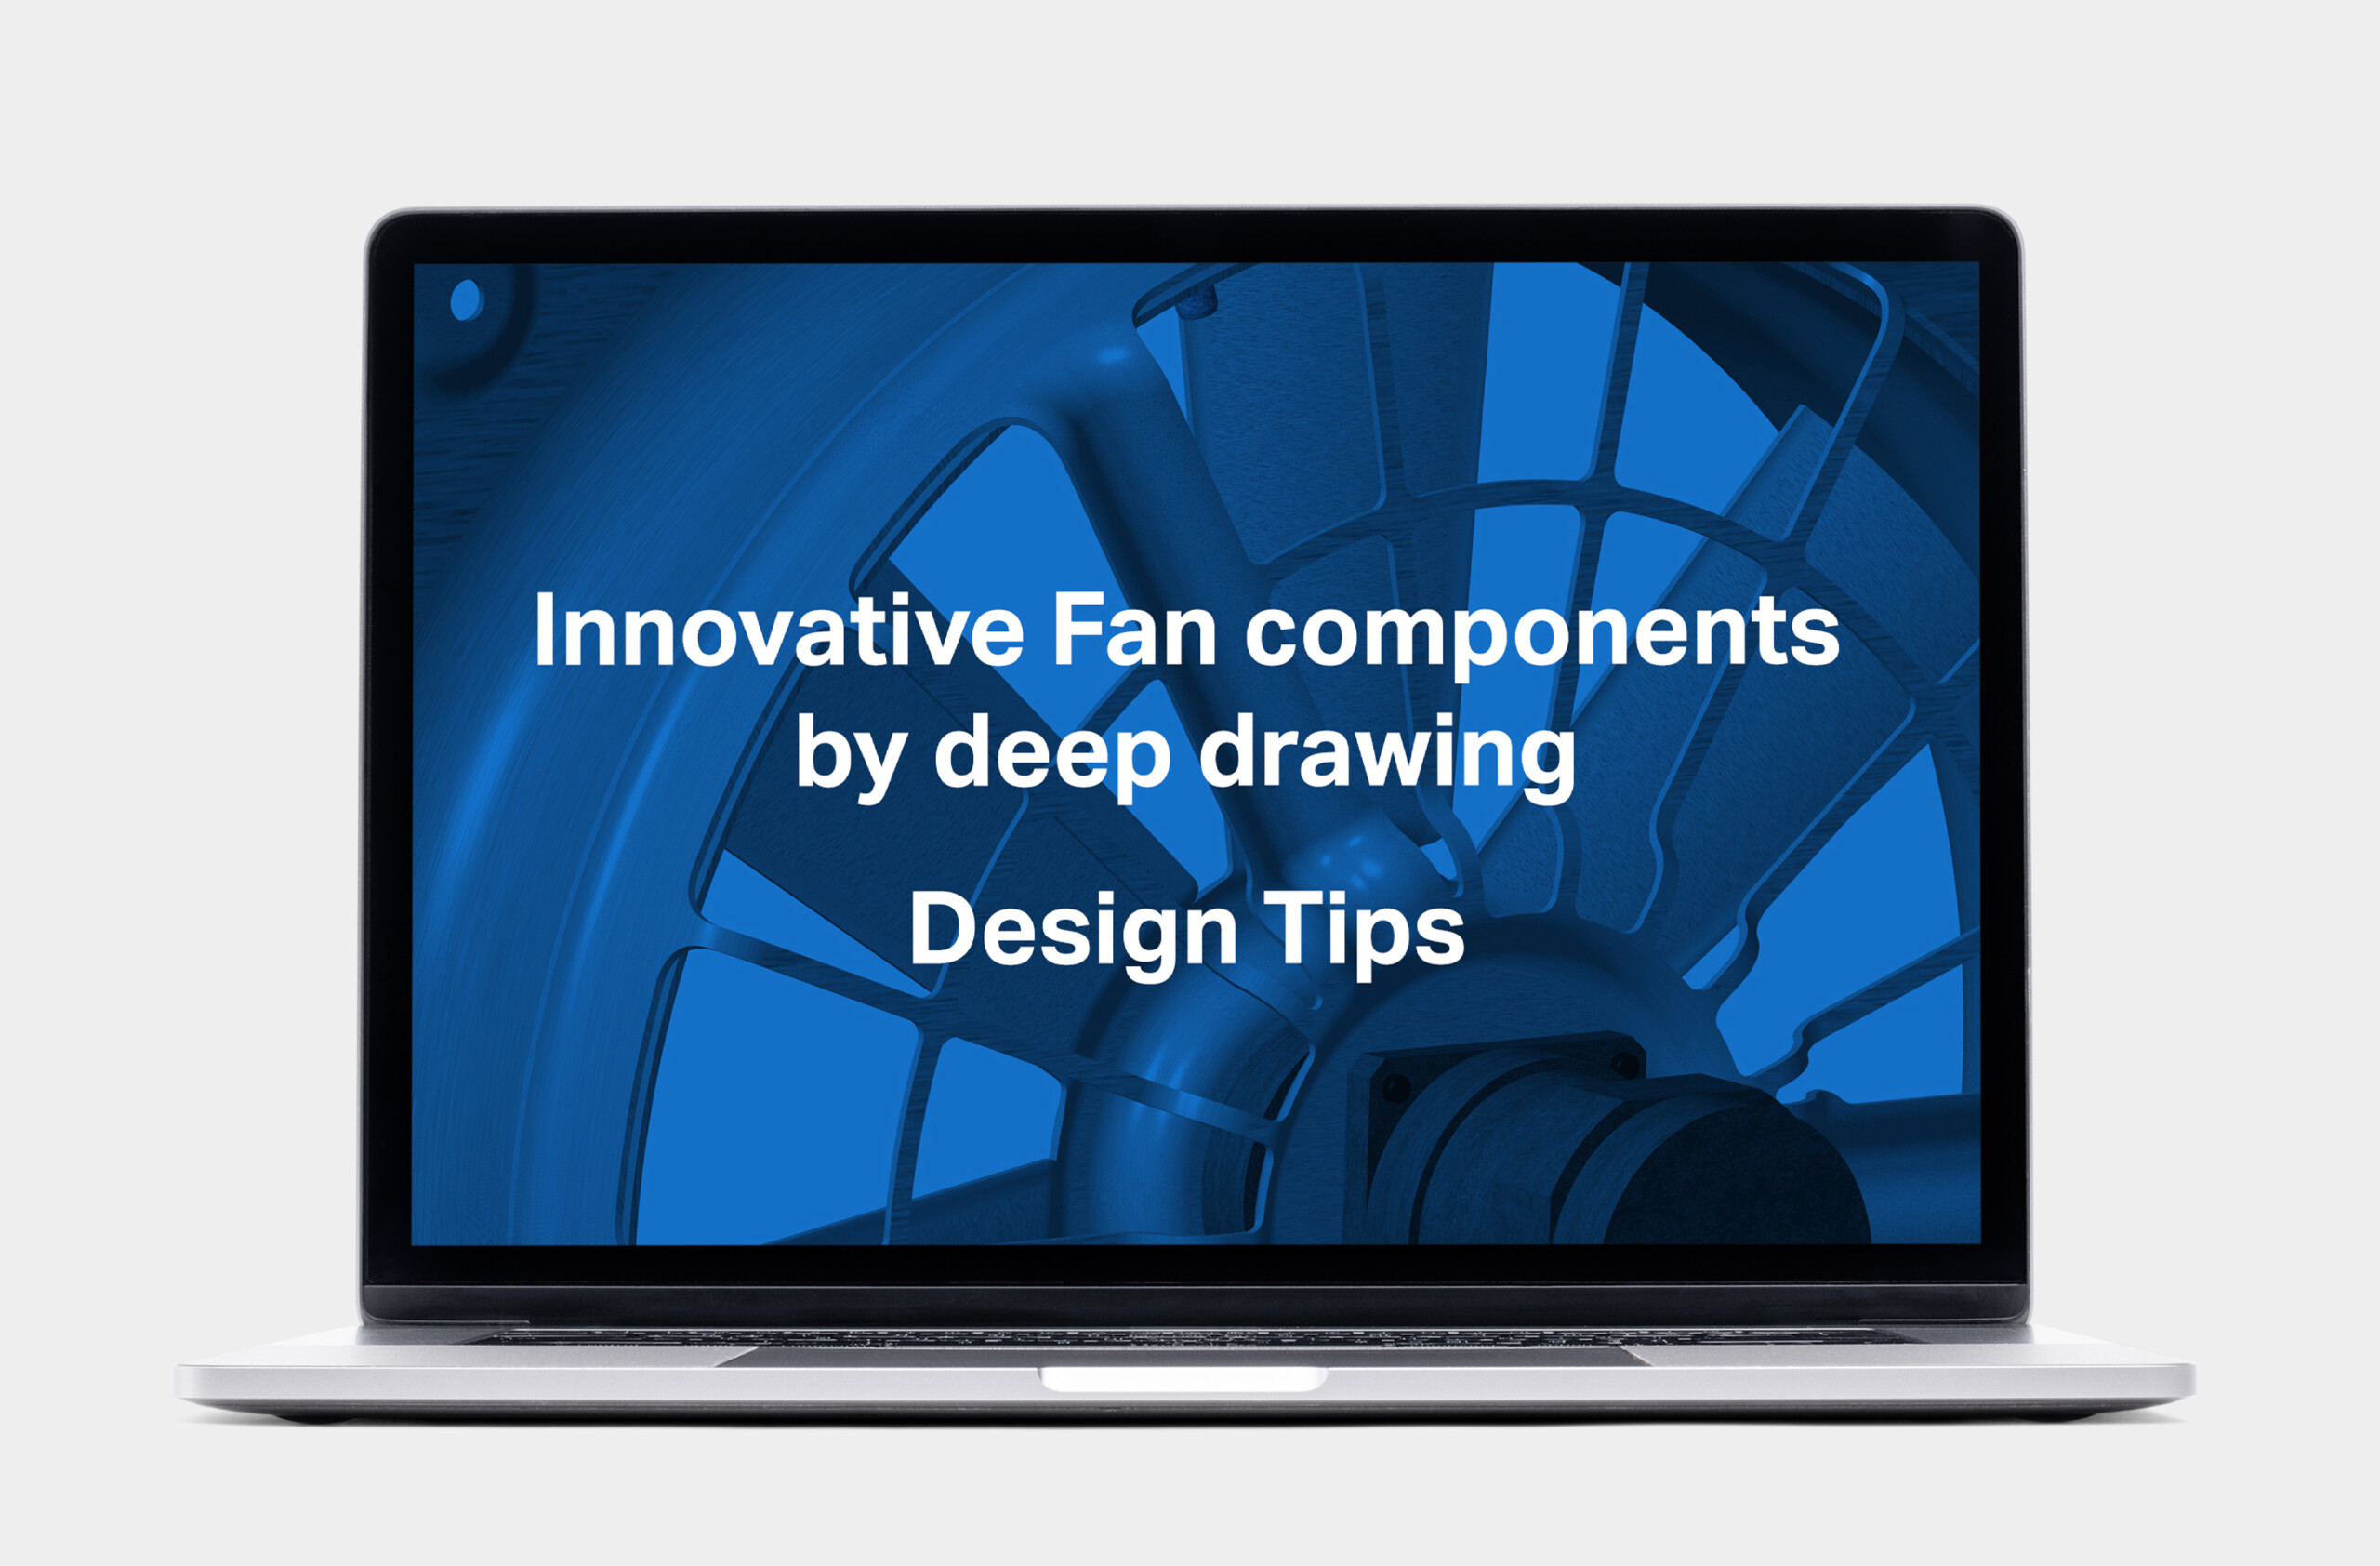 Innovative fan components by deep drawing